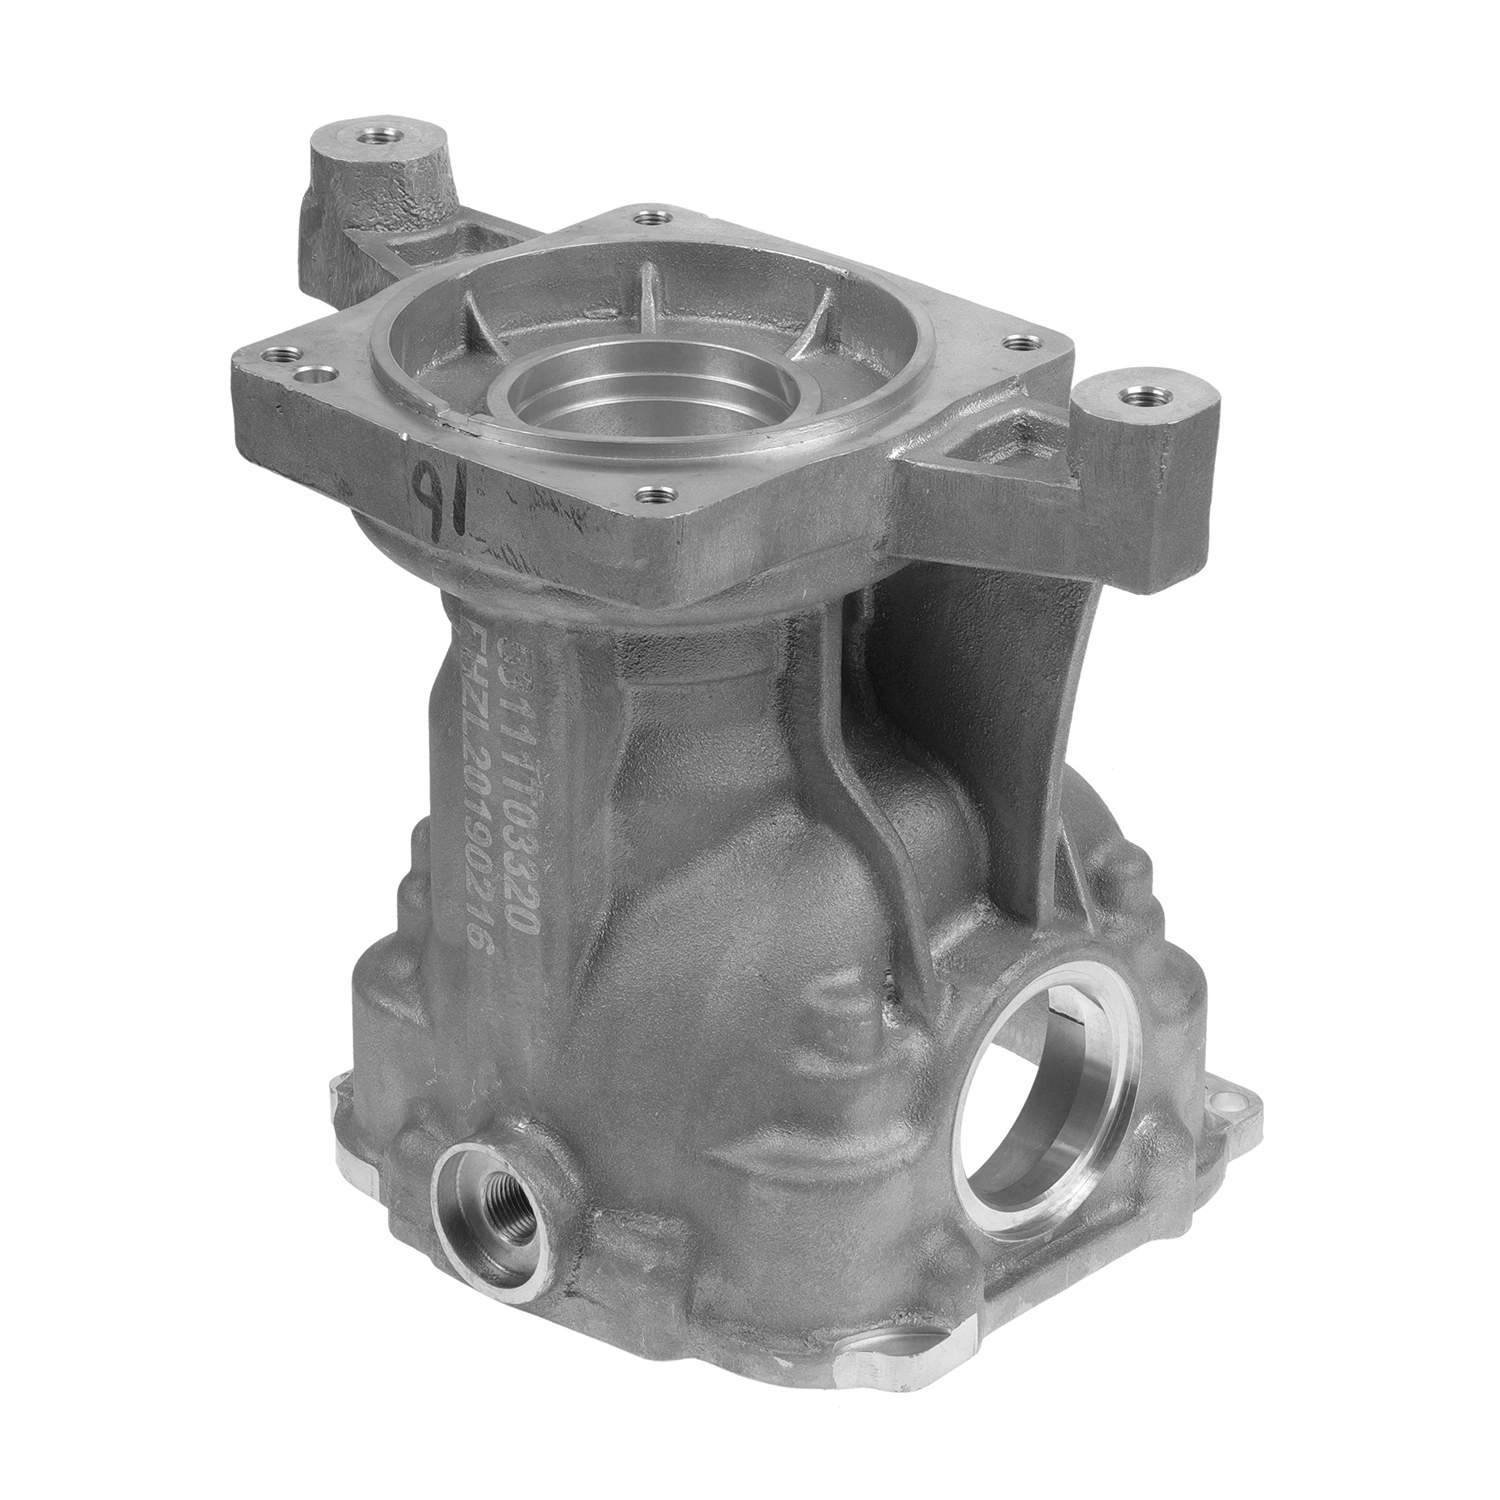 OEM Customized 3D Printing Patternless Sand Casting Cast Aluminum Lithium Battery Case Engine Block Cylinder Head Clutch Part by Rapid Cylinder Head Prototype